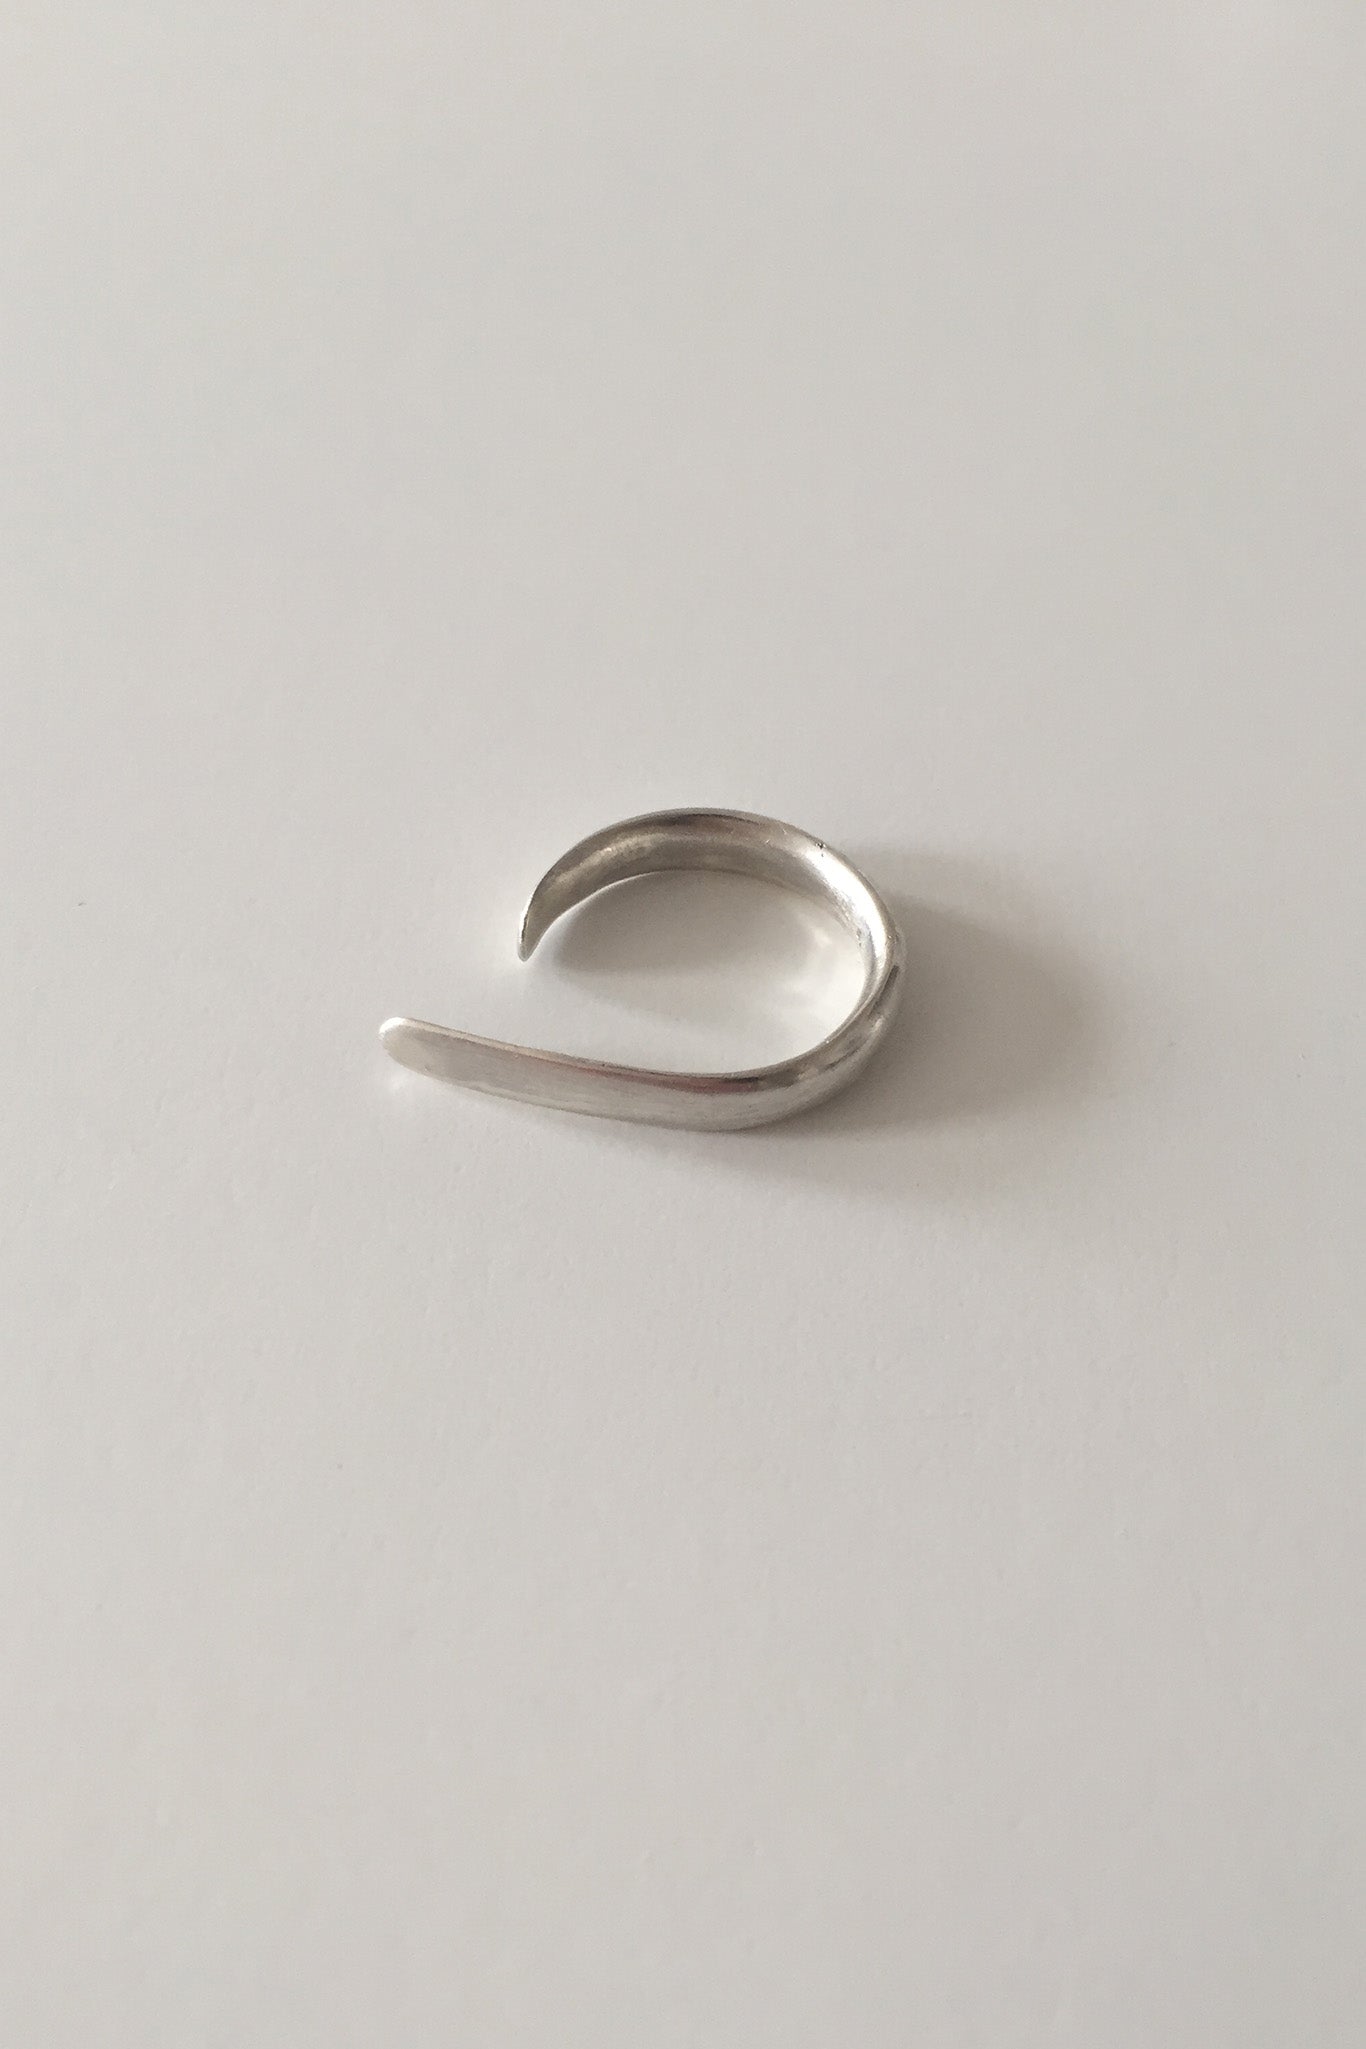 Ordinary Objects Tail Ring